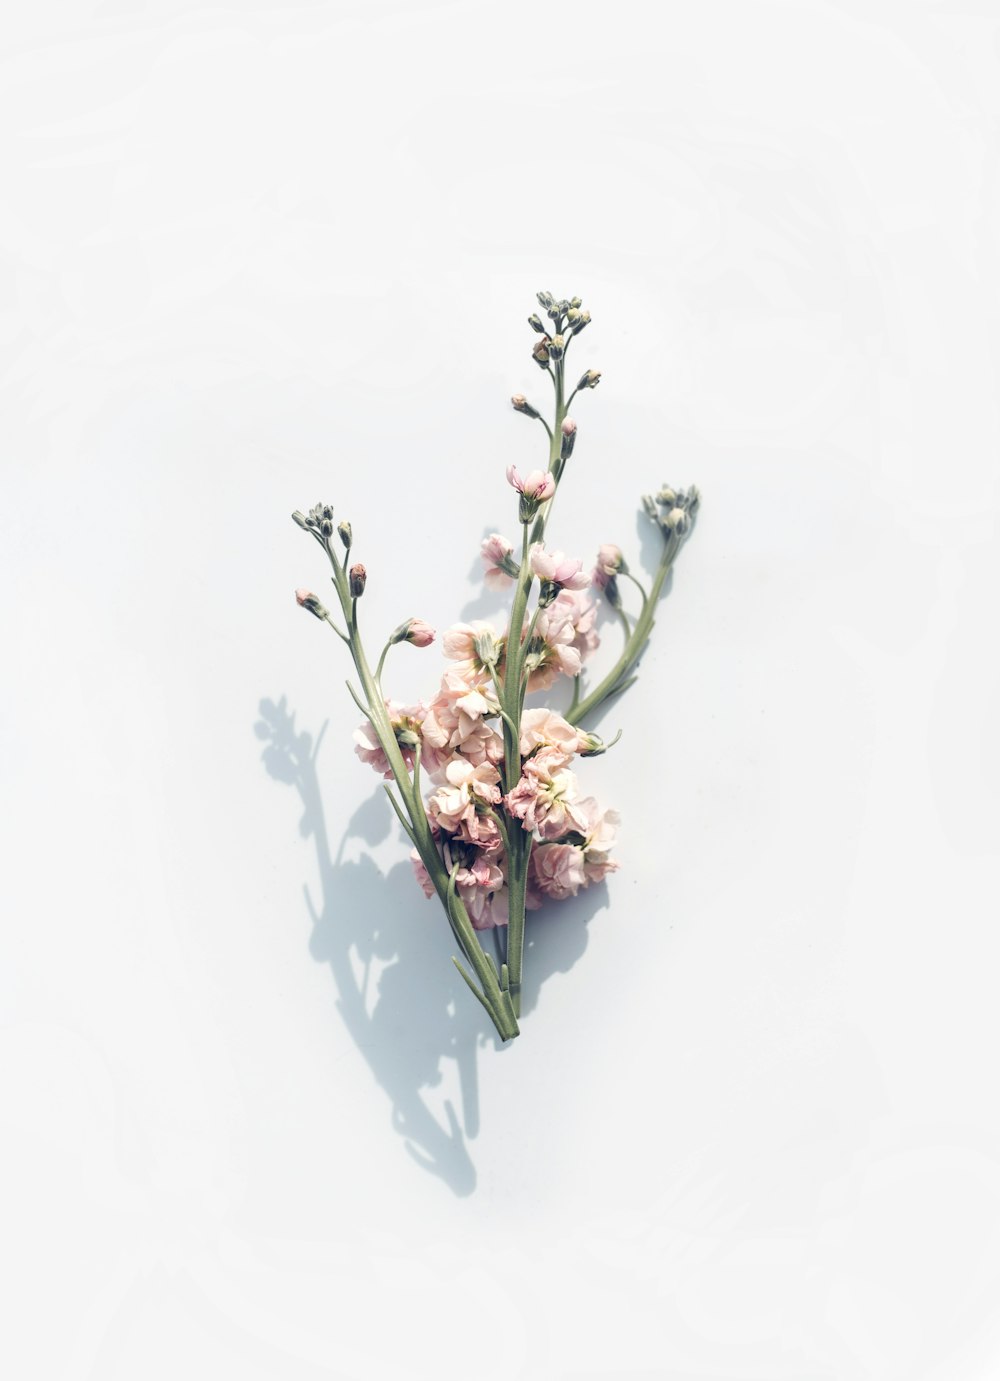 Simple Flower Pictures | Download Free Images on Unsplash